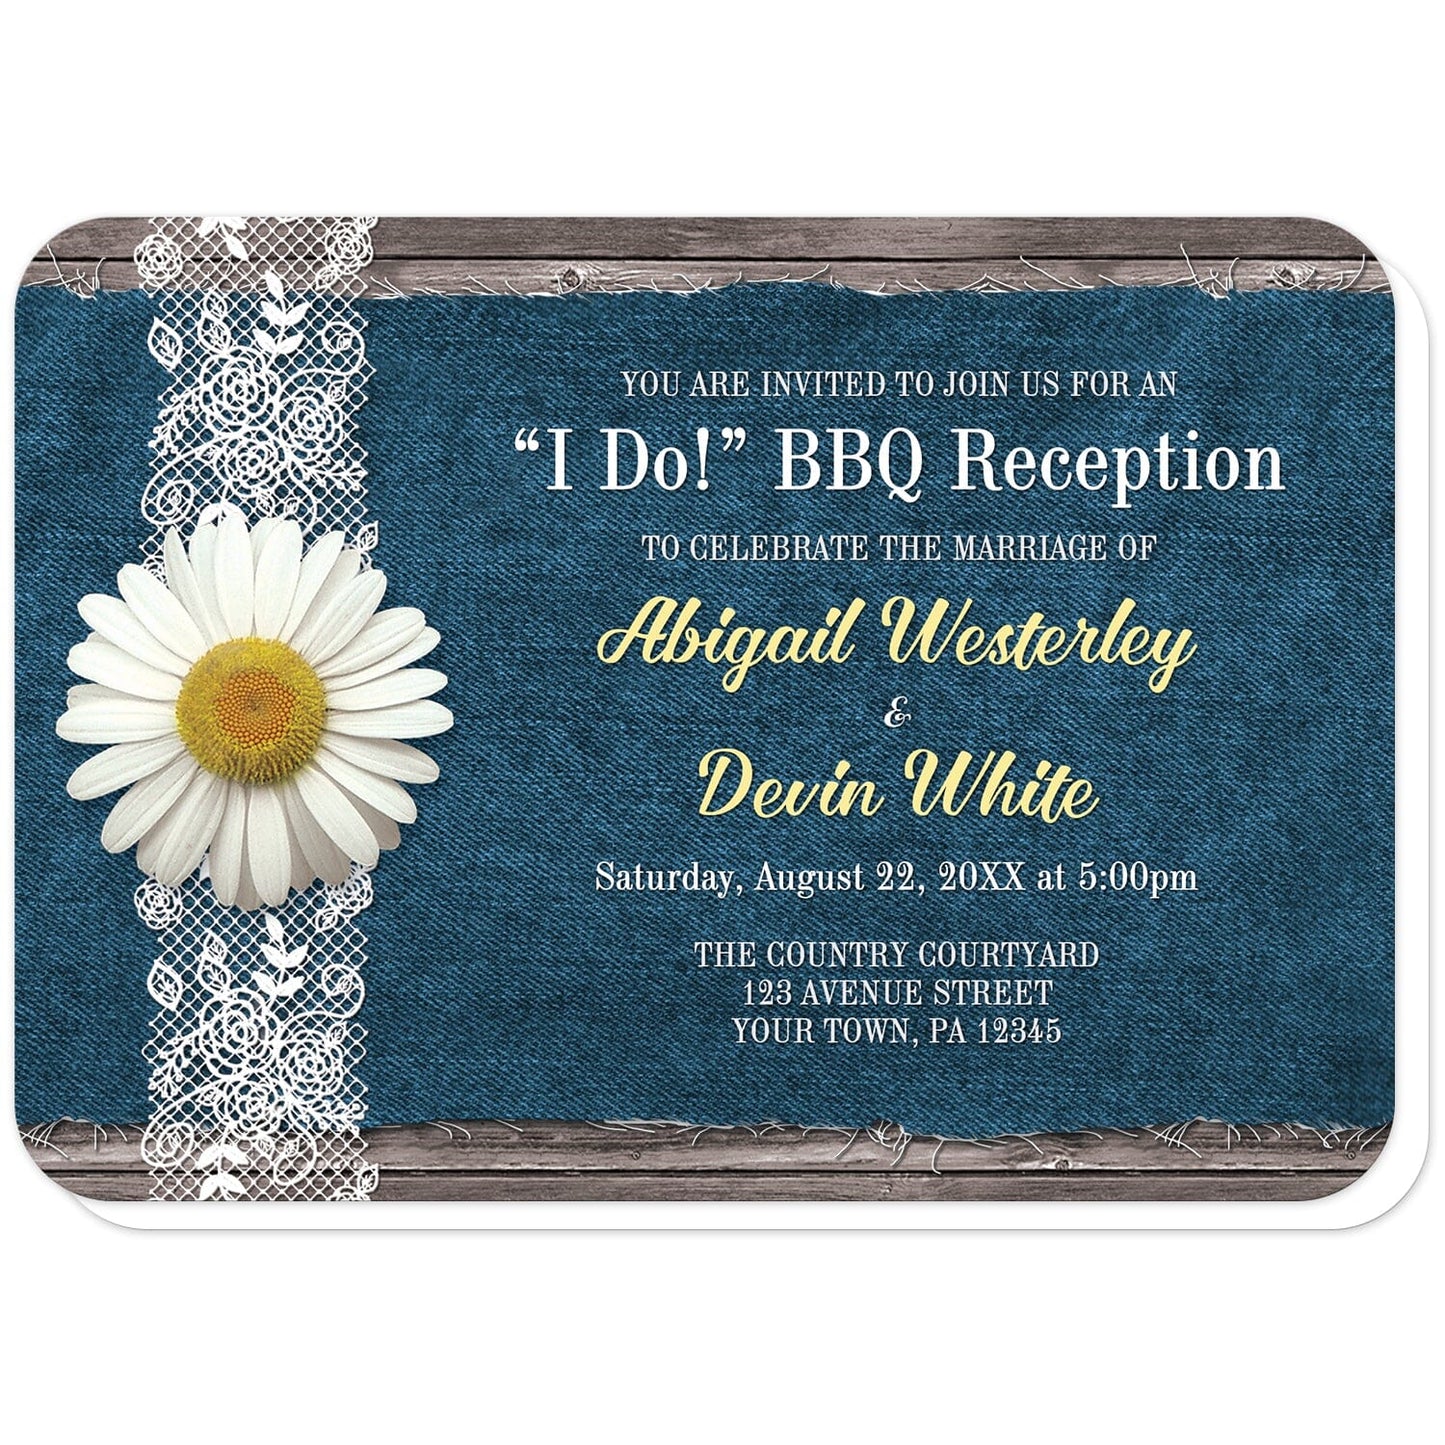 Daisy Denim and Lace I Do BBQ Reception Only Invitations (with rounded corners) at Artistically Invited. Invites with a white daisy flower on a white lace ribbon along the left side. Your personalized post-wedding reception celebration details are custom printed in white, light gray, and yellow over a fraying blue denim fabric background illustration over rustic wood. This design is great for couples combining different popular themed elements including a daisy, rustic wood, and denim and lace.